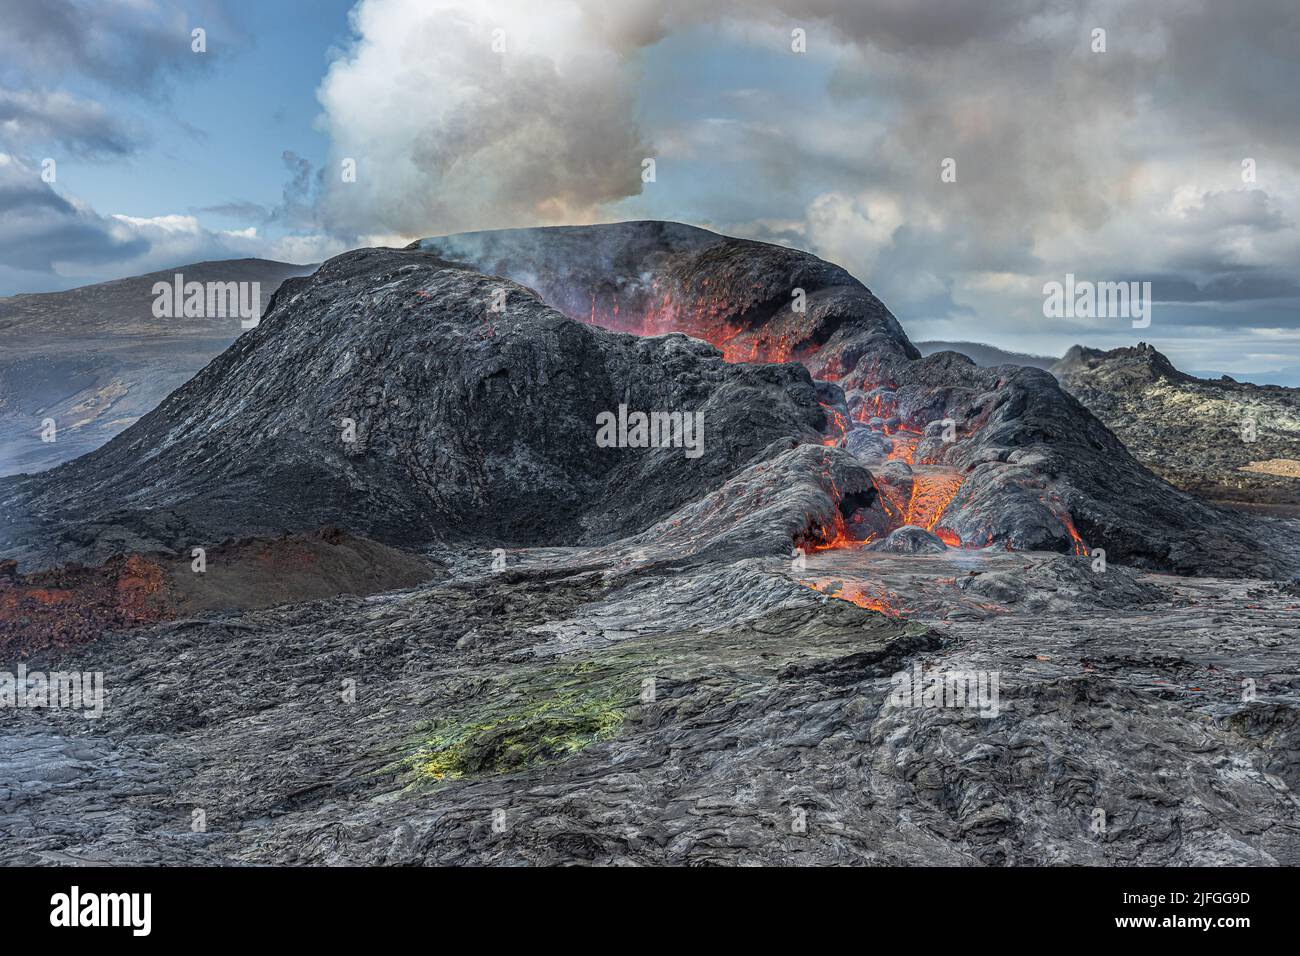 volcano after the eruption. Volcanic landscape on the Reykjanes Peninsula. Active volcano in Iceland with no lava flow. cooled magma around the crater Stock Photo